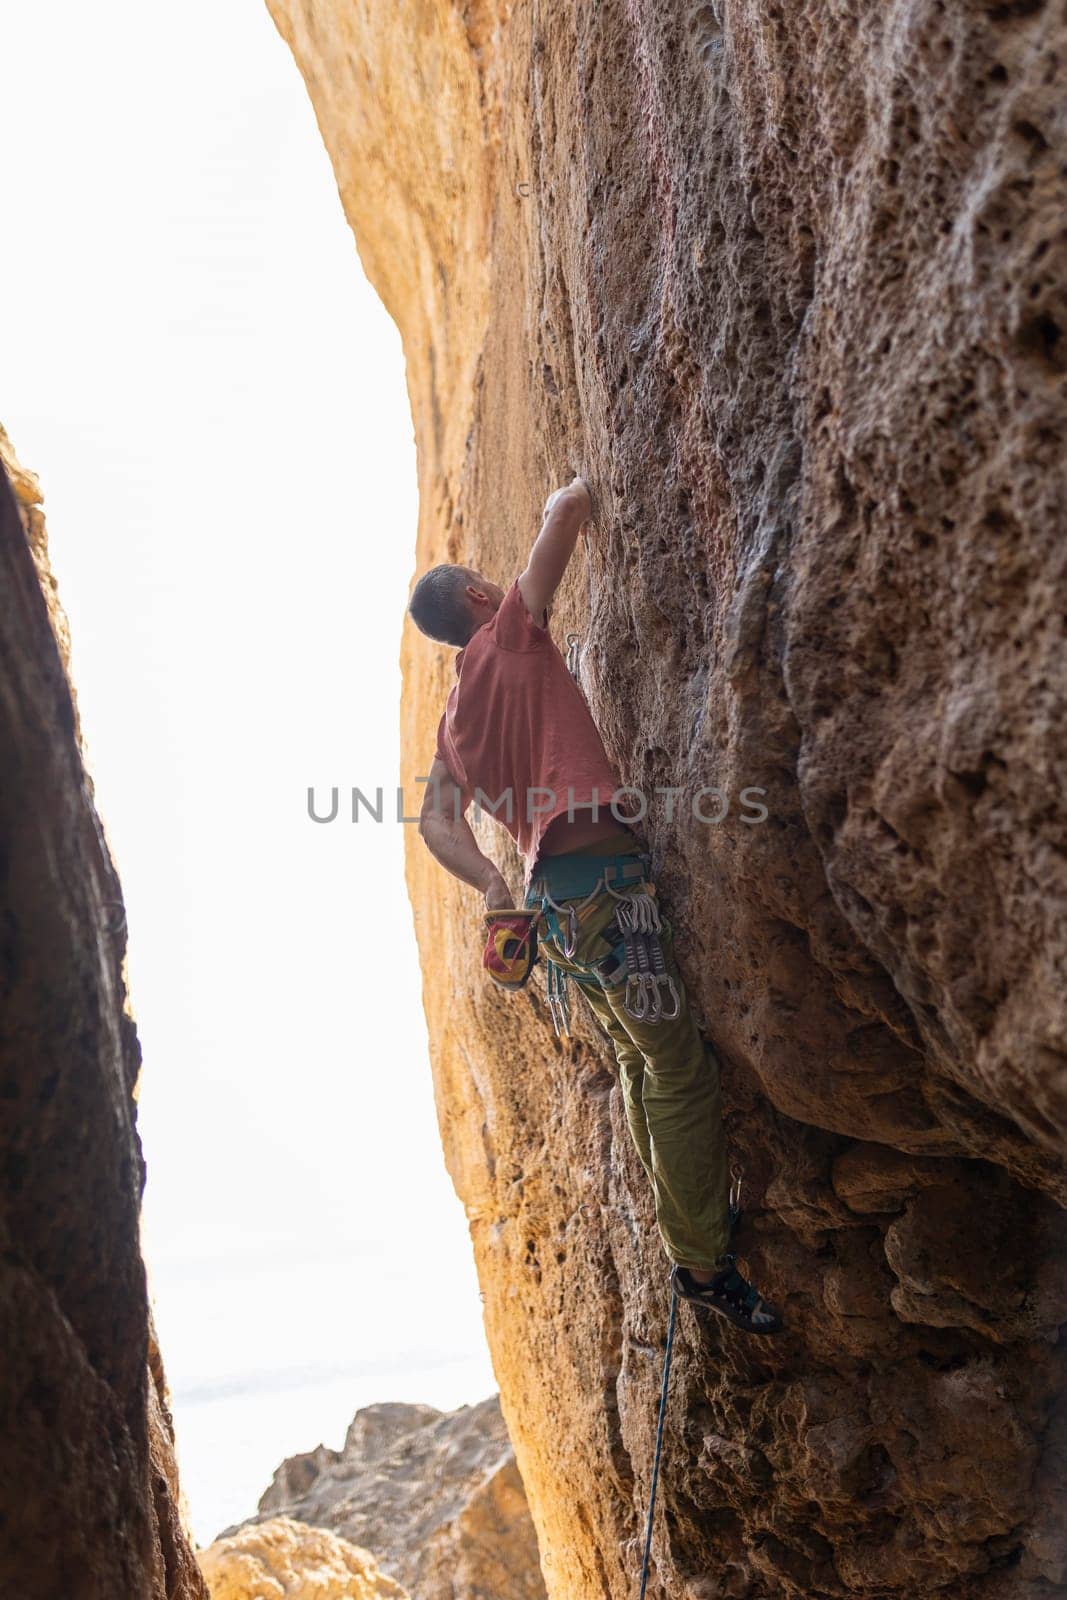 A man is climbing a rock wall with a yellow rope. The sun is shining on the wall, creating a warm and inviting atmosphere. The man is focused on his climb, and the image conveys a sense of adventure